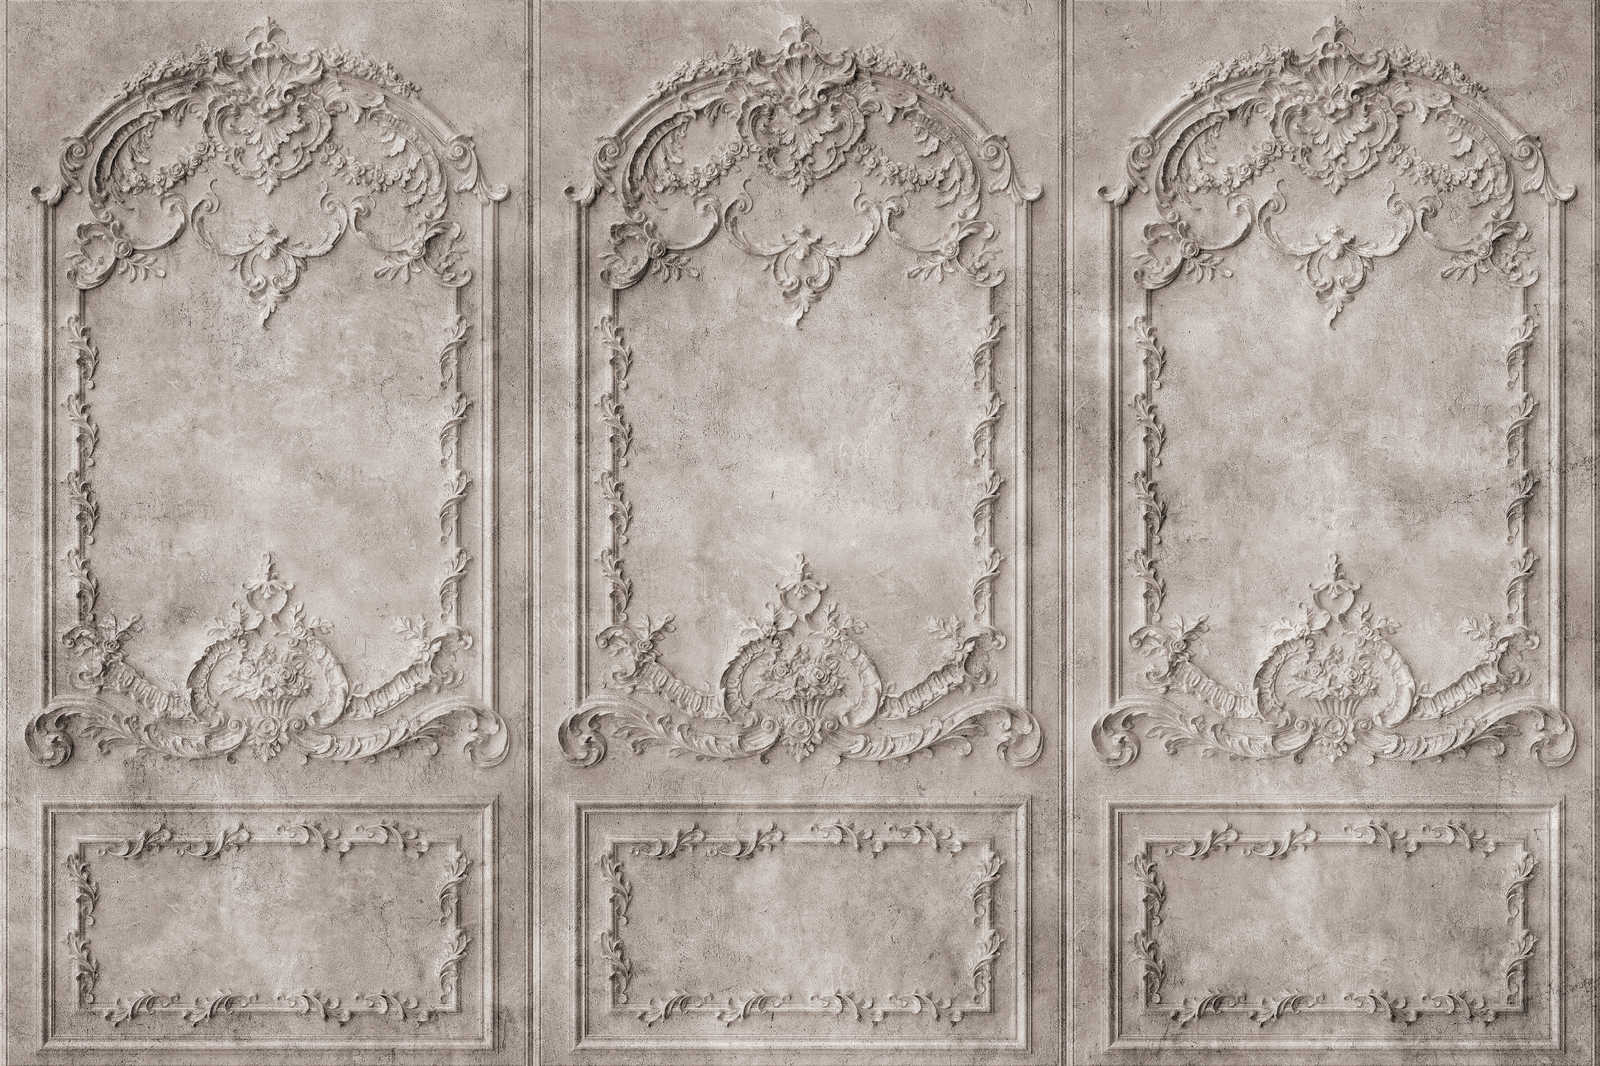             Versailles 1 - Canvas painting Grey-Brown Baroque style wooden panels - 1.20 m x 0.80 m
        